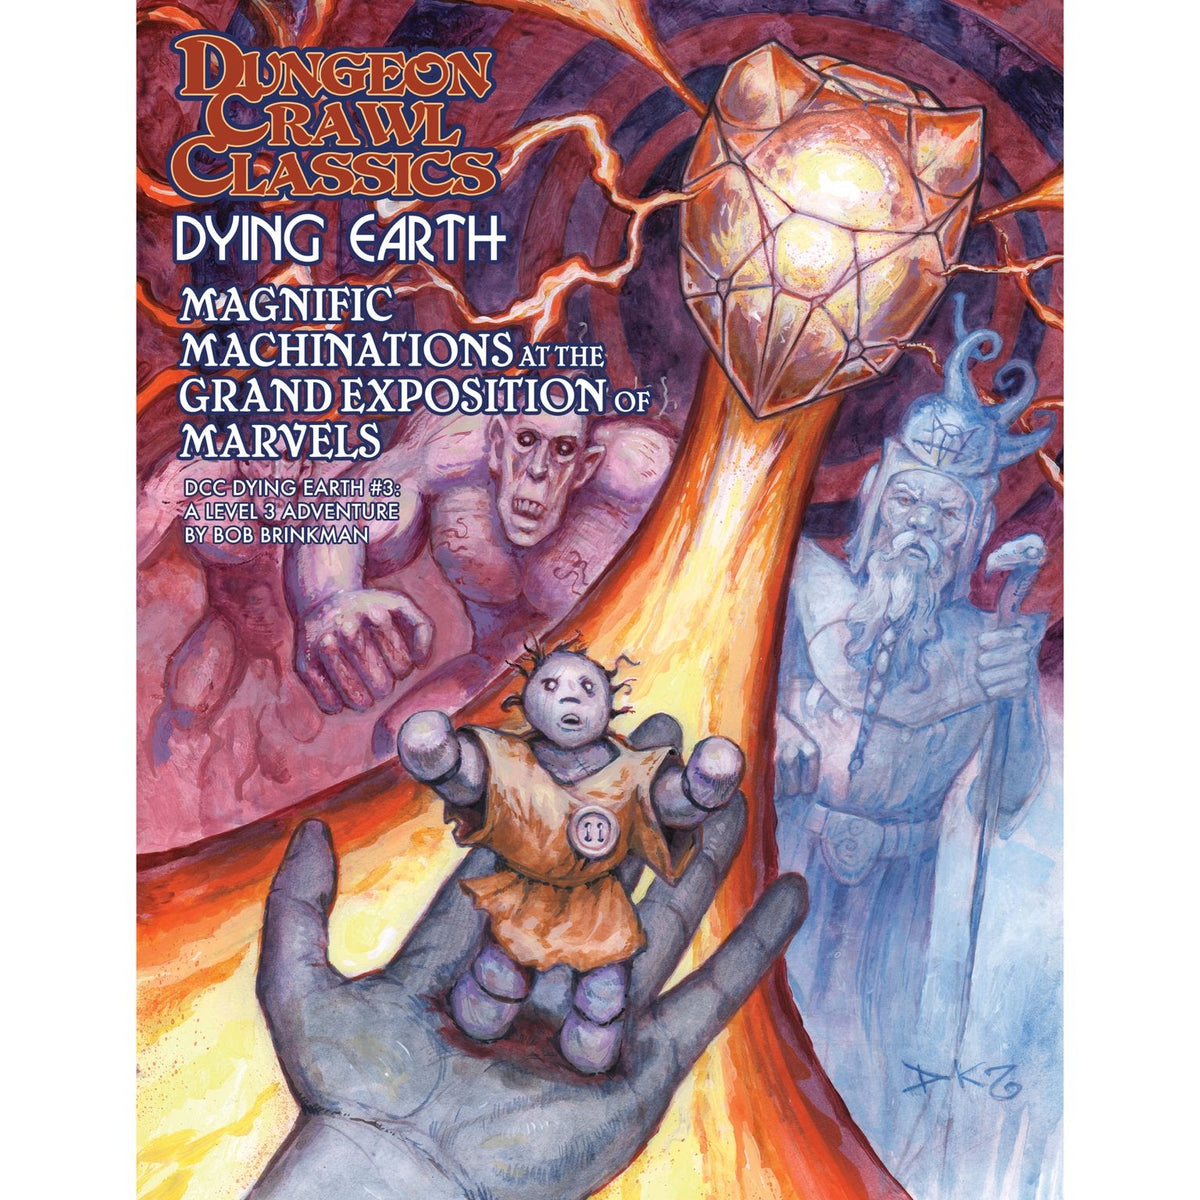 Dungeon Crawl Classics Dying Earth #3: Magnificent Machinations at the Grand Exposition